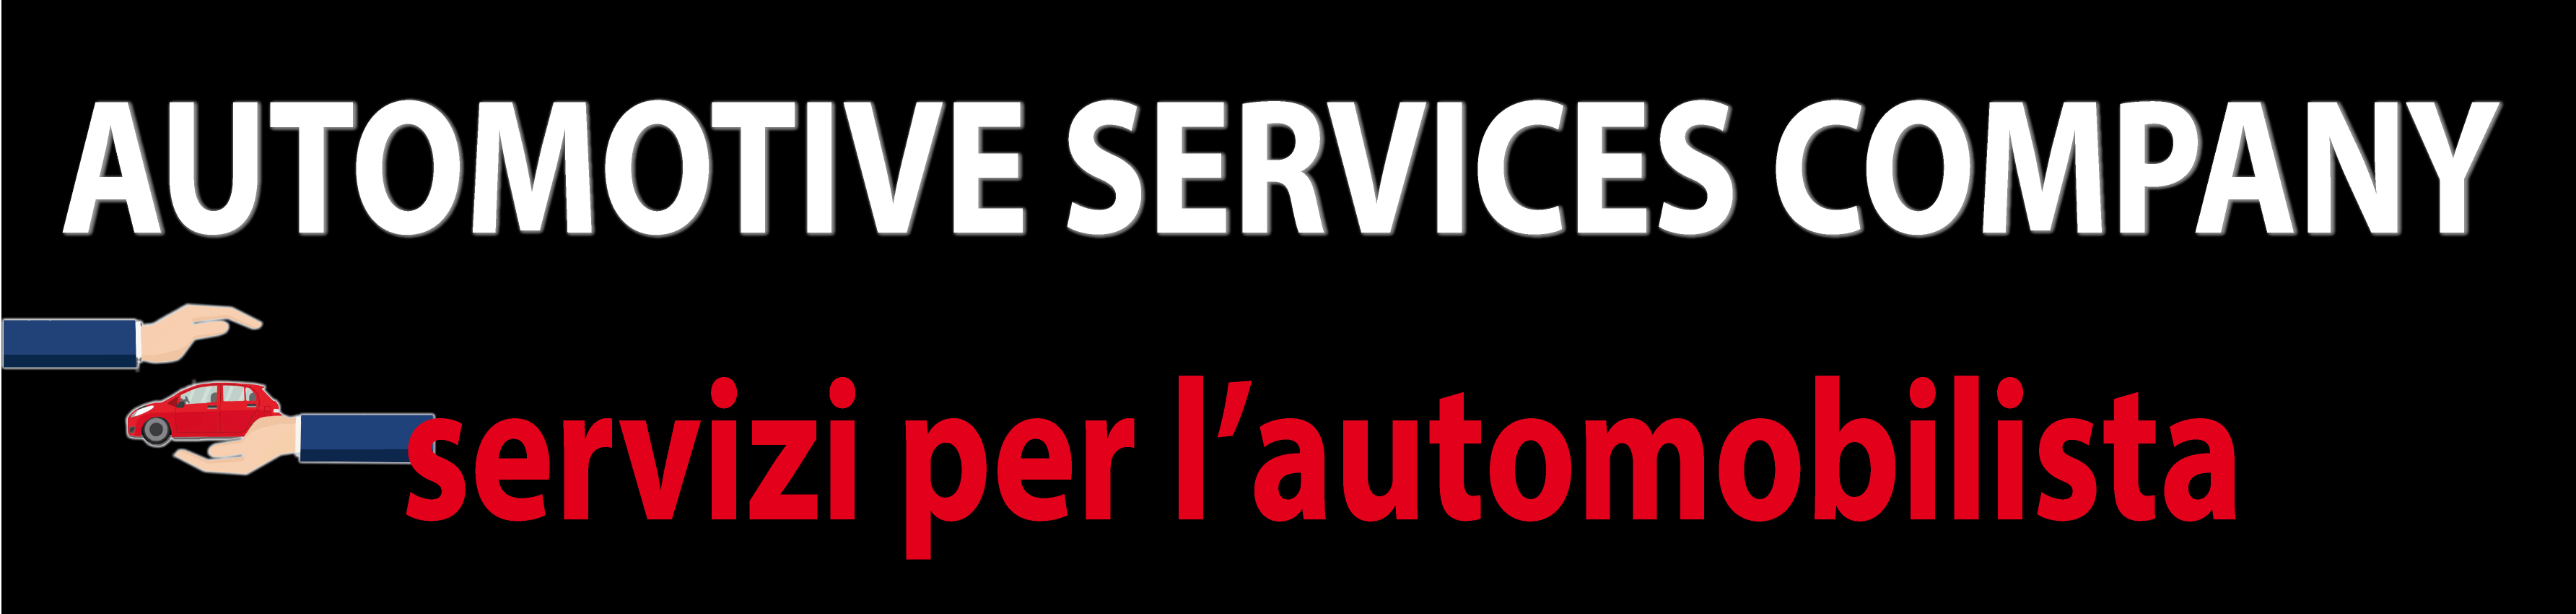 Automitive Services Company